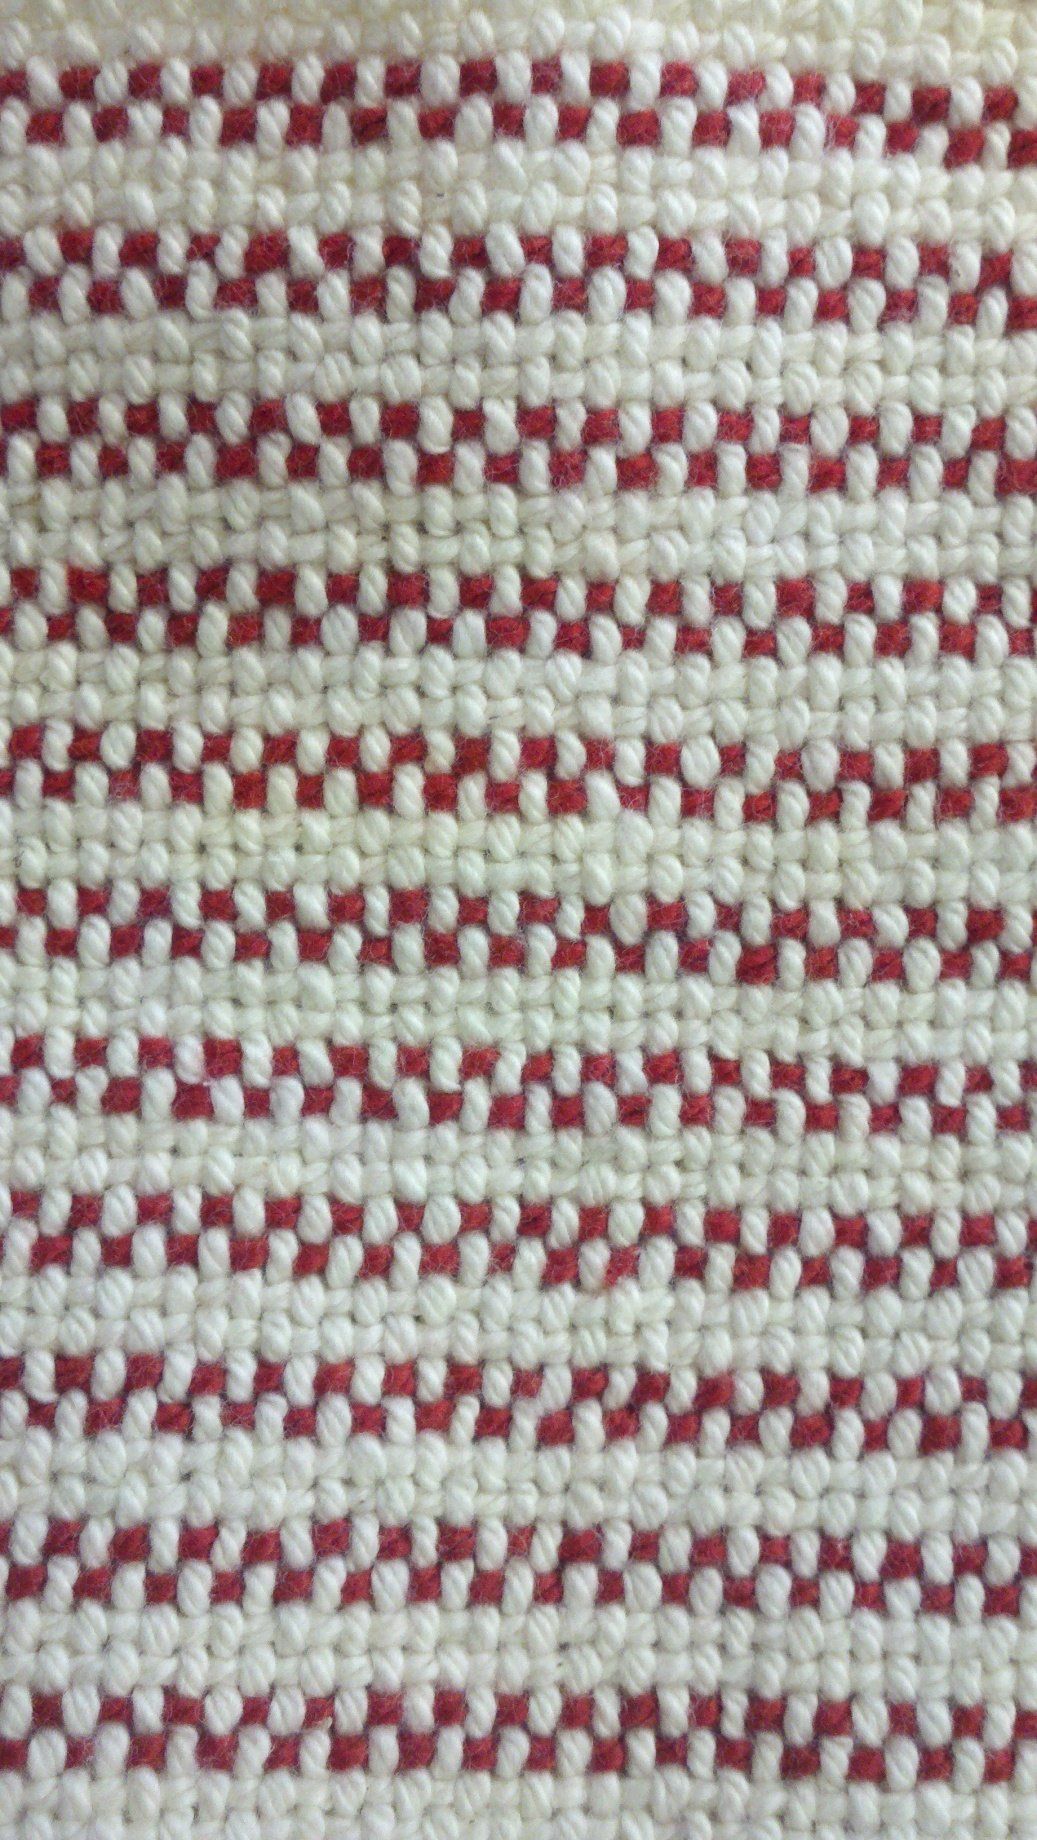 Red and White Stripe Blanket, in New York, NY